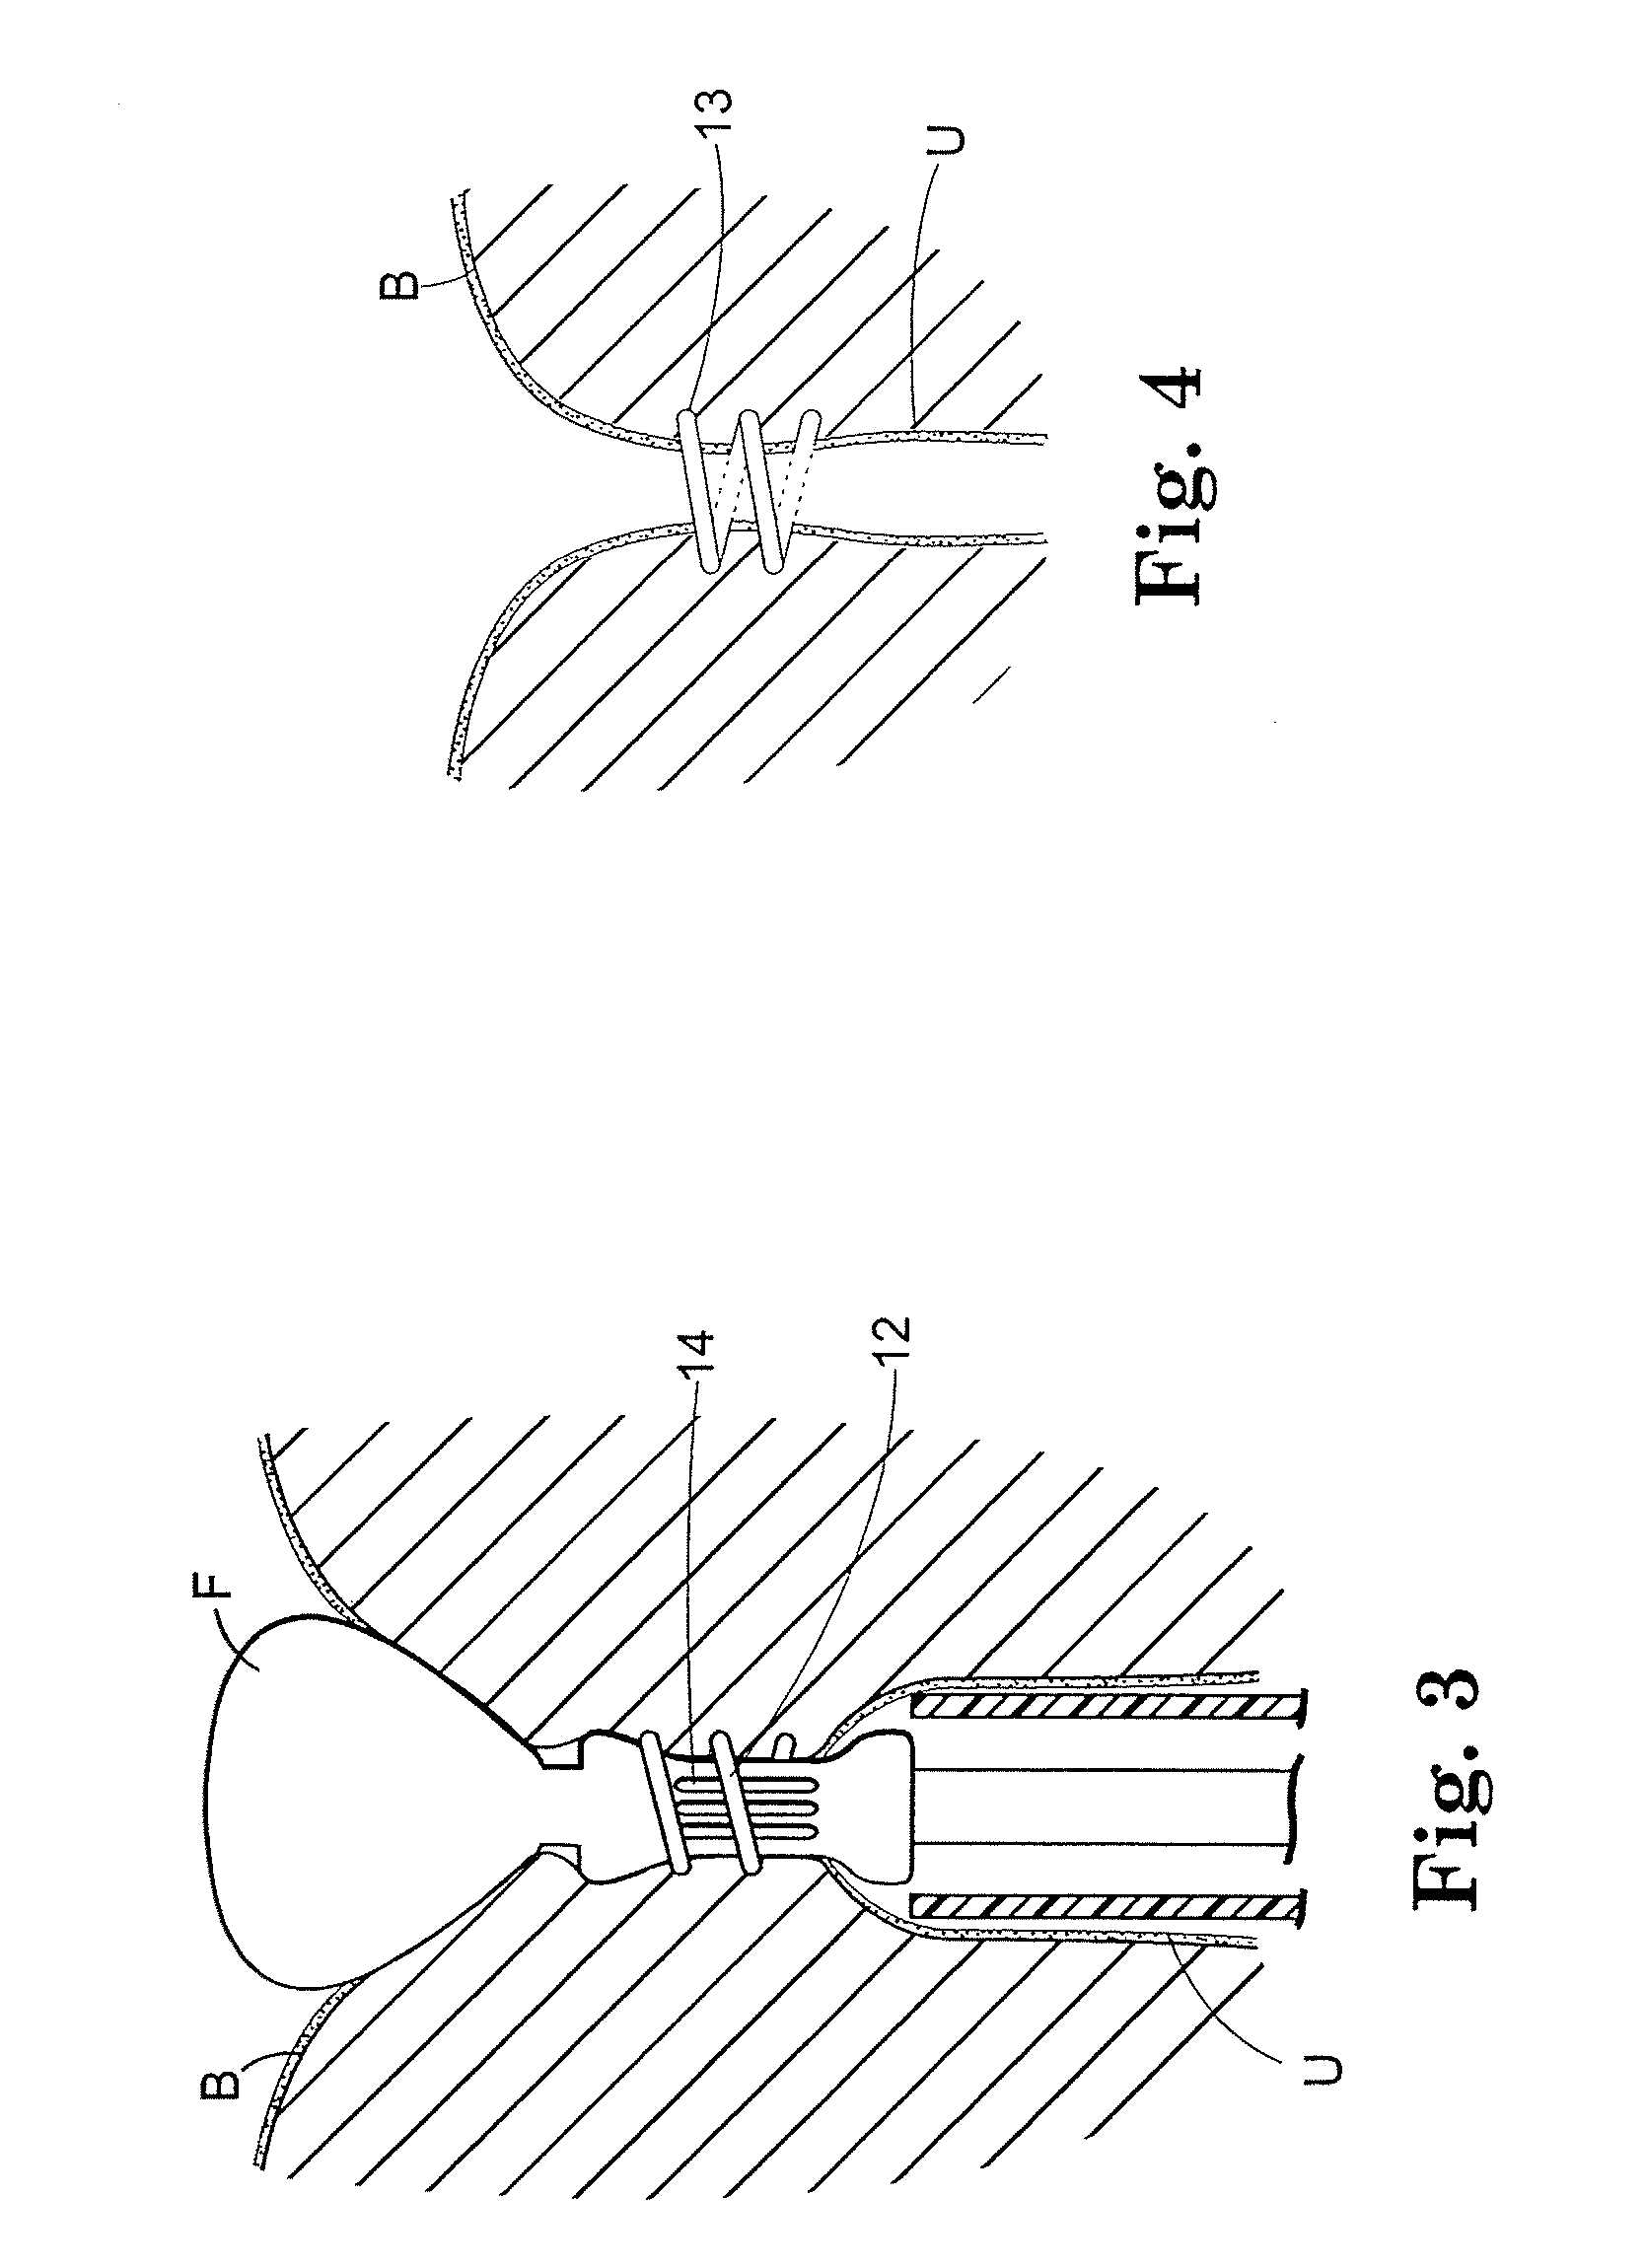 Surgical Articles for Placing an Implant about a Tubular Tissue Structure and Methods